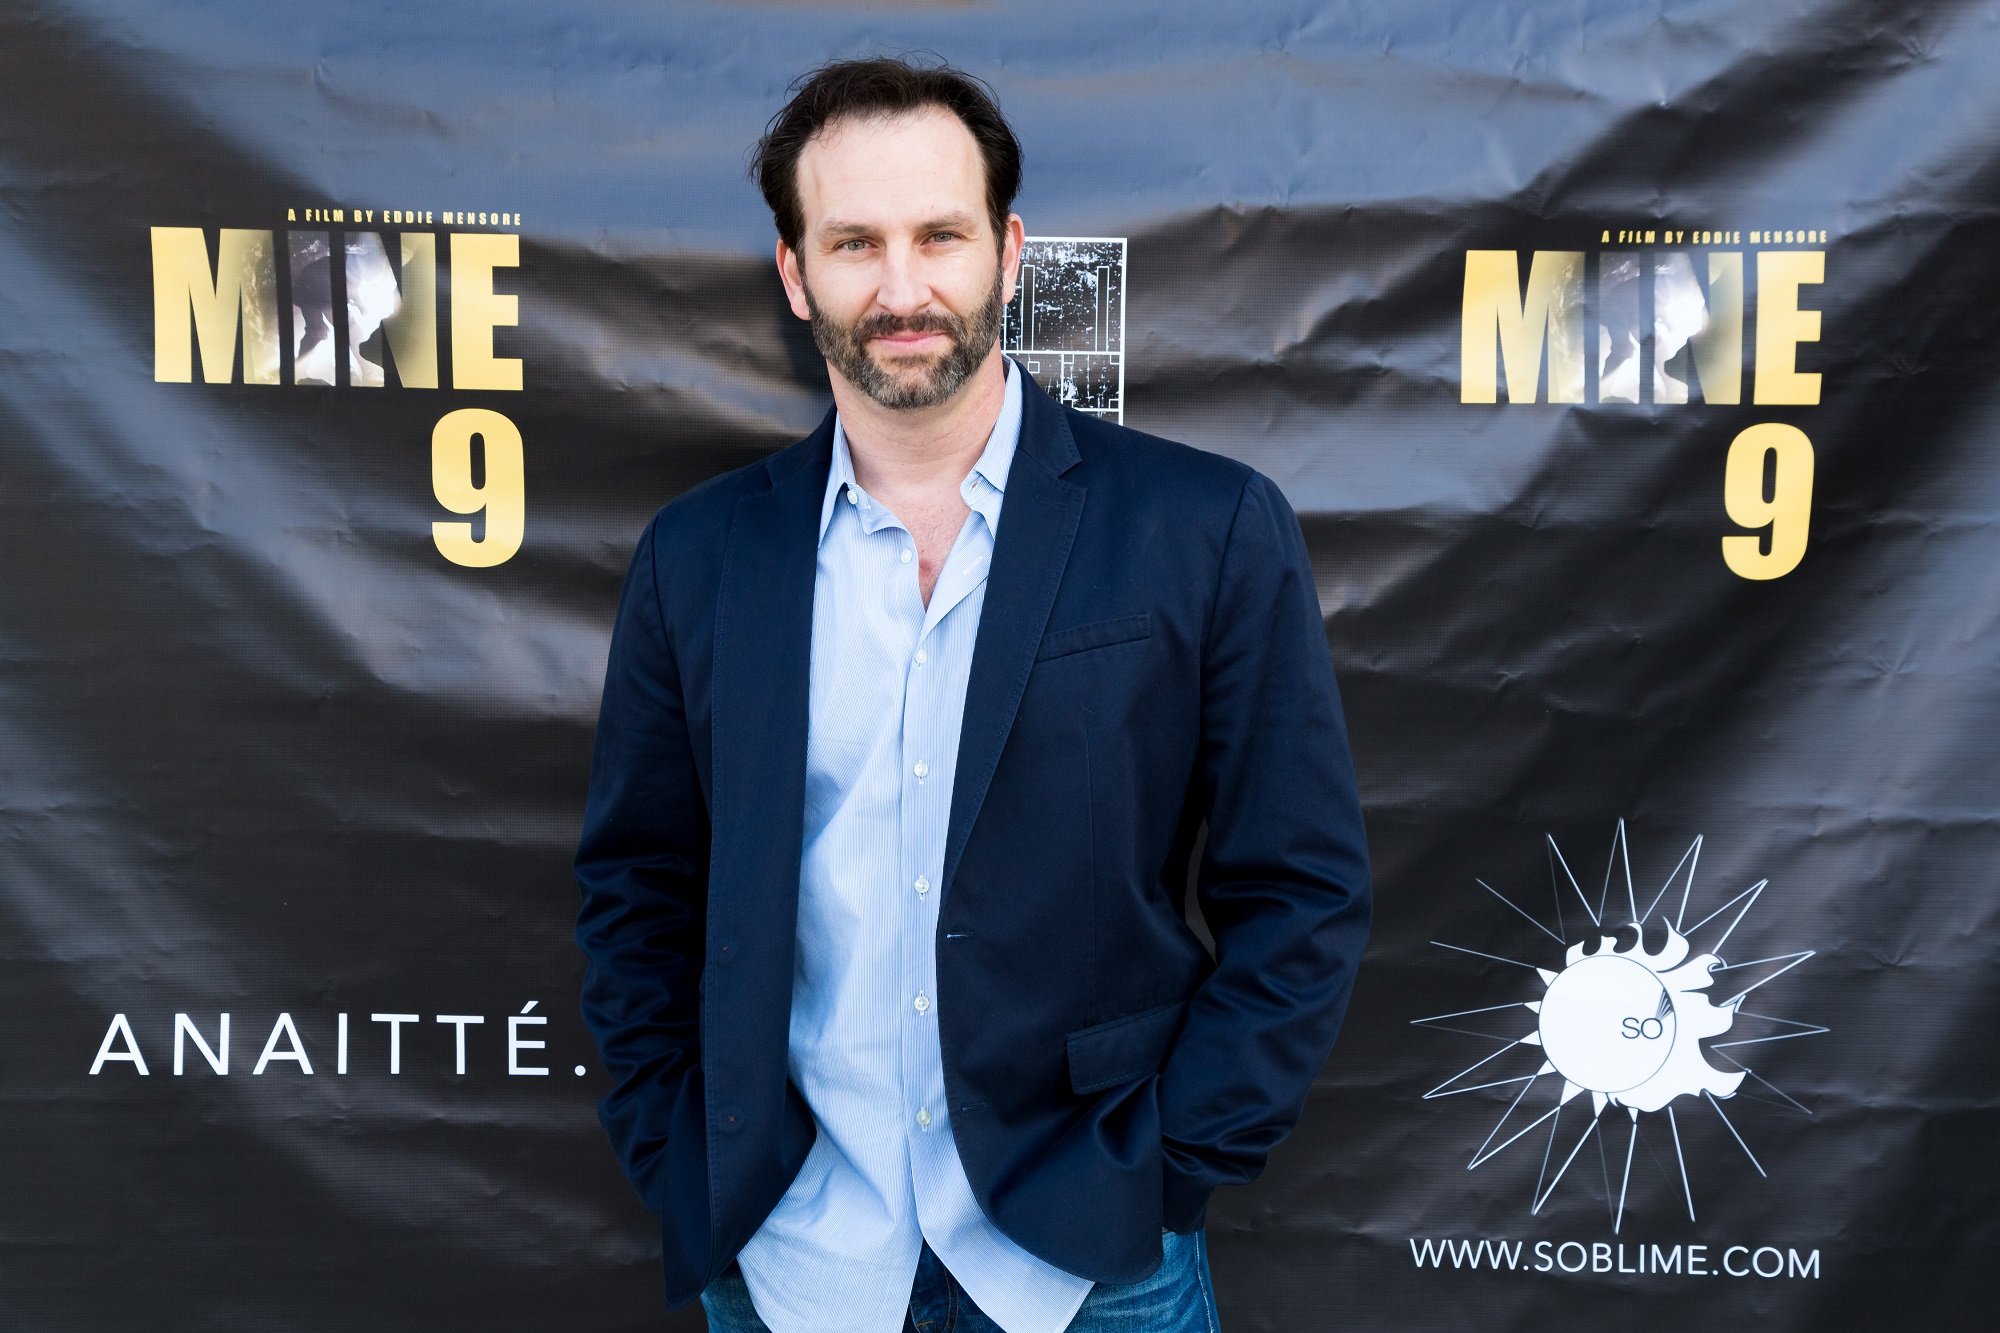 Days of Our Lives comings and goings focuses on Kevin Sizemore, pictured here in a black sweater and checkered shirt, on the red carpet against a black background